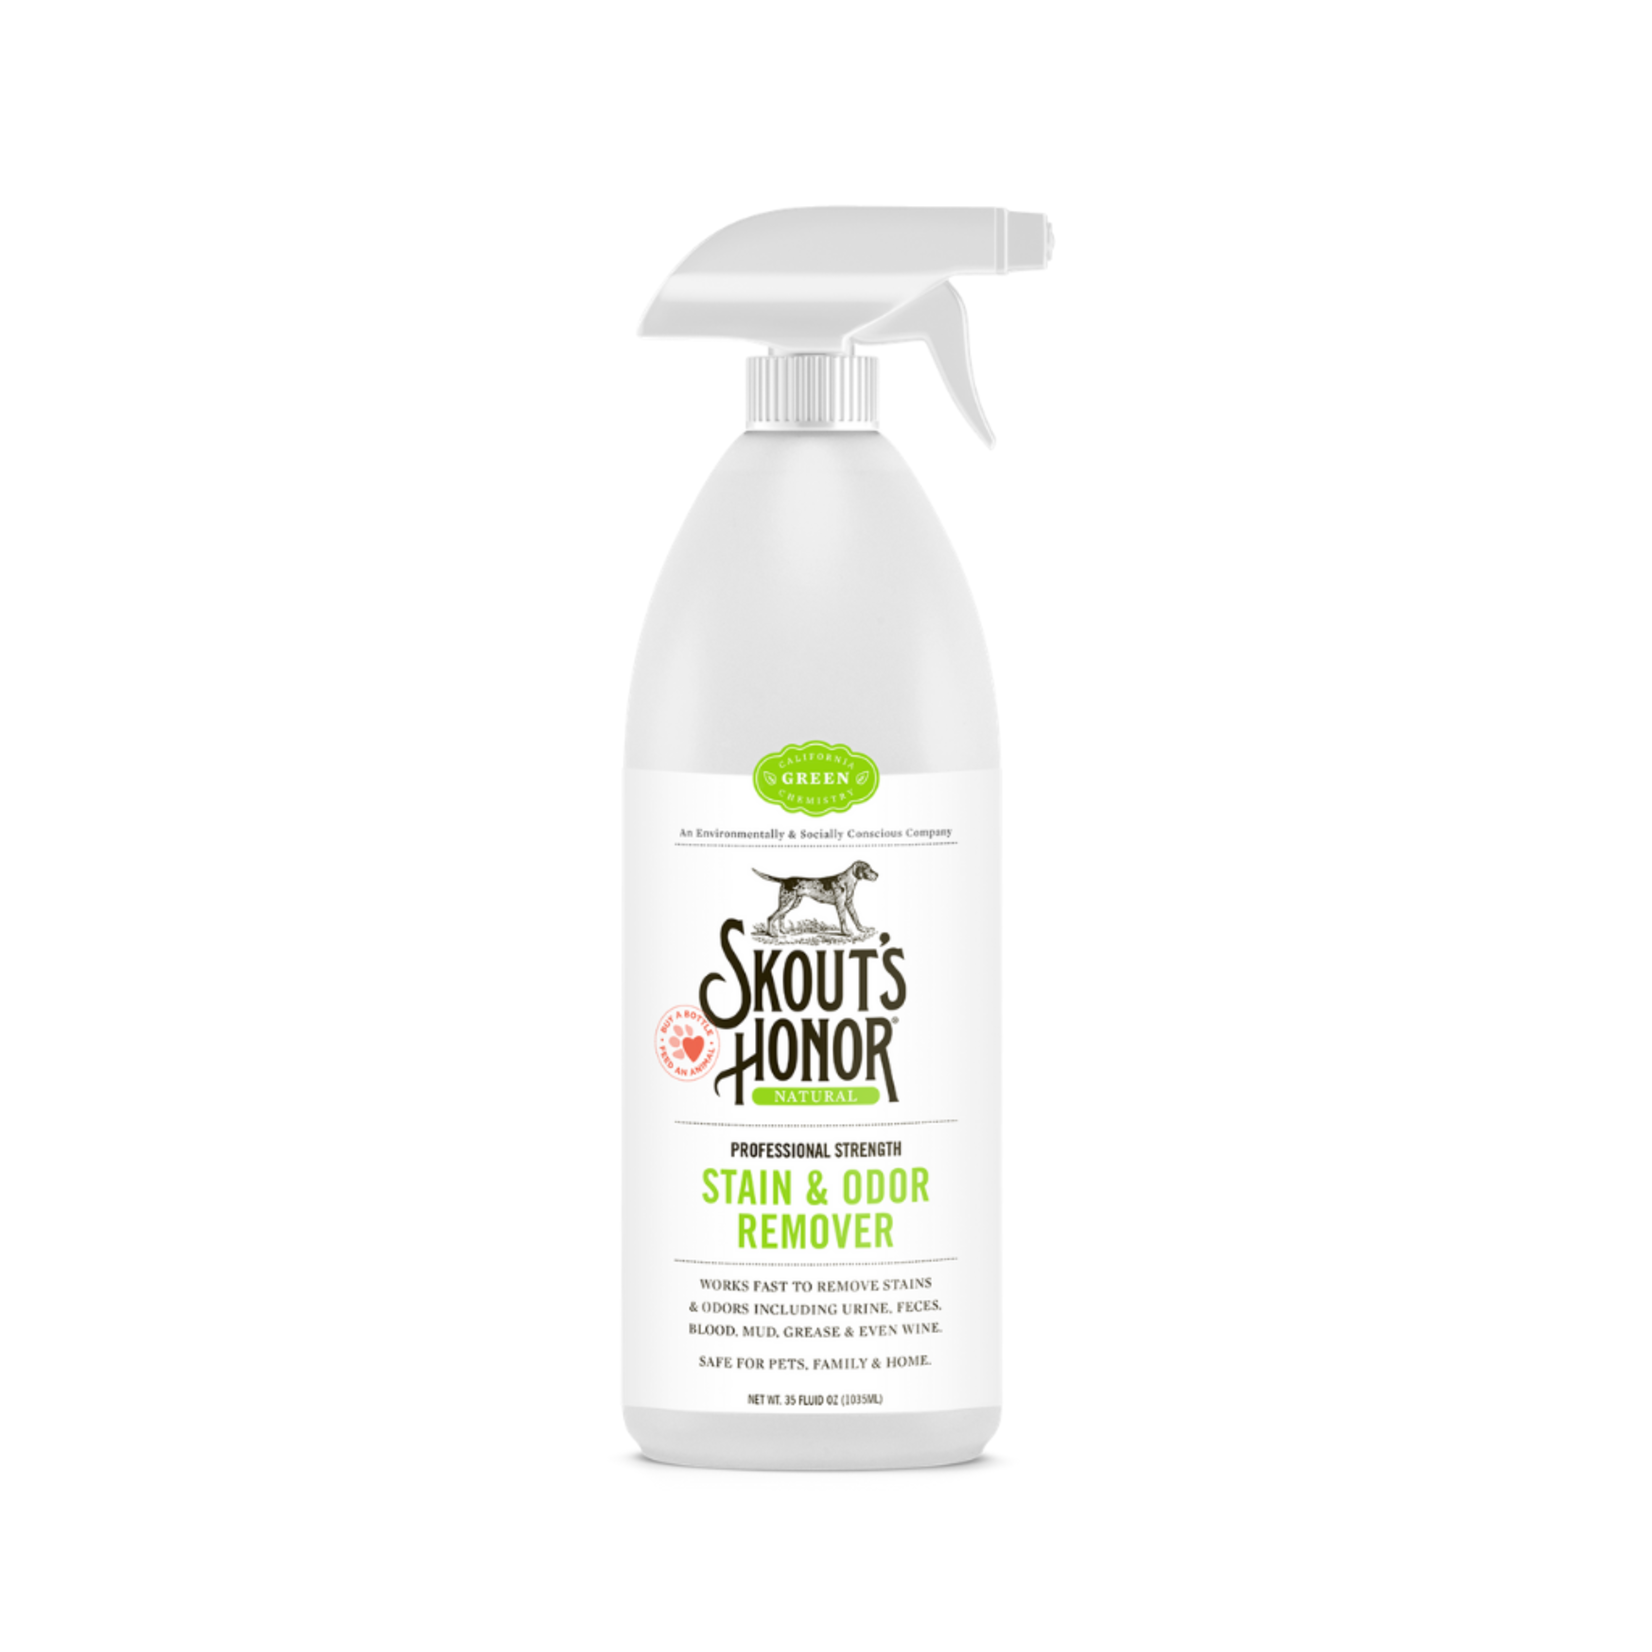 Skouts Honor SK HONOR CLEANING STAIN ODOR REMOVER 35 OZ GREEN LABEL